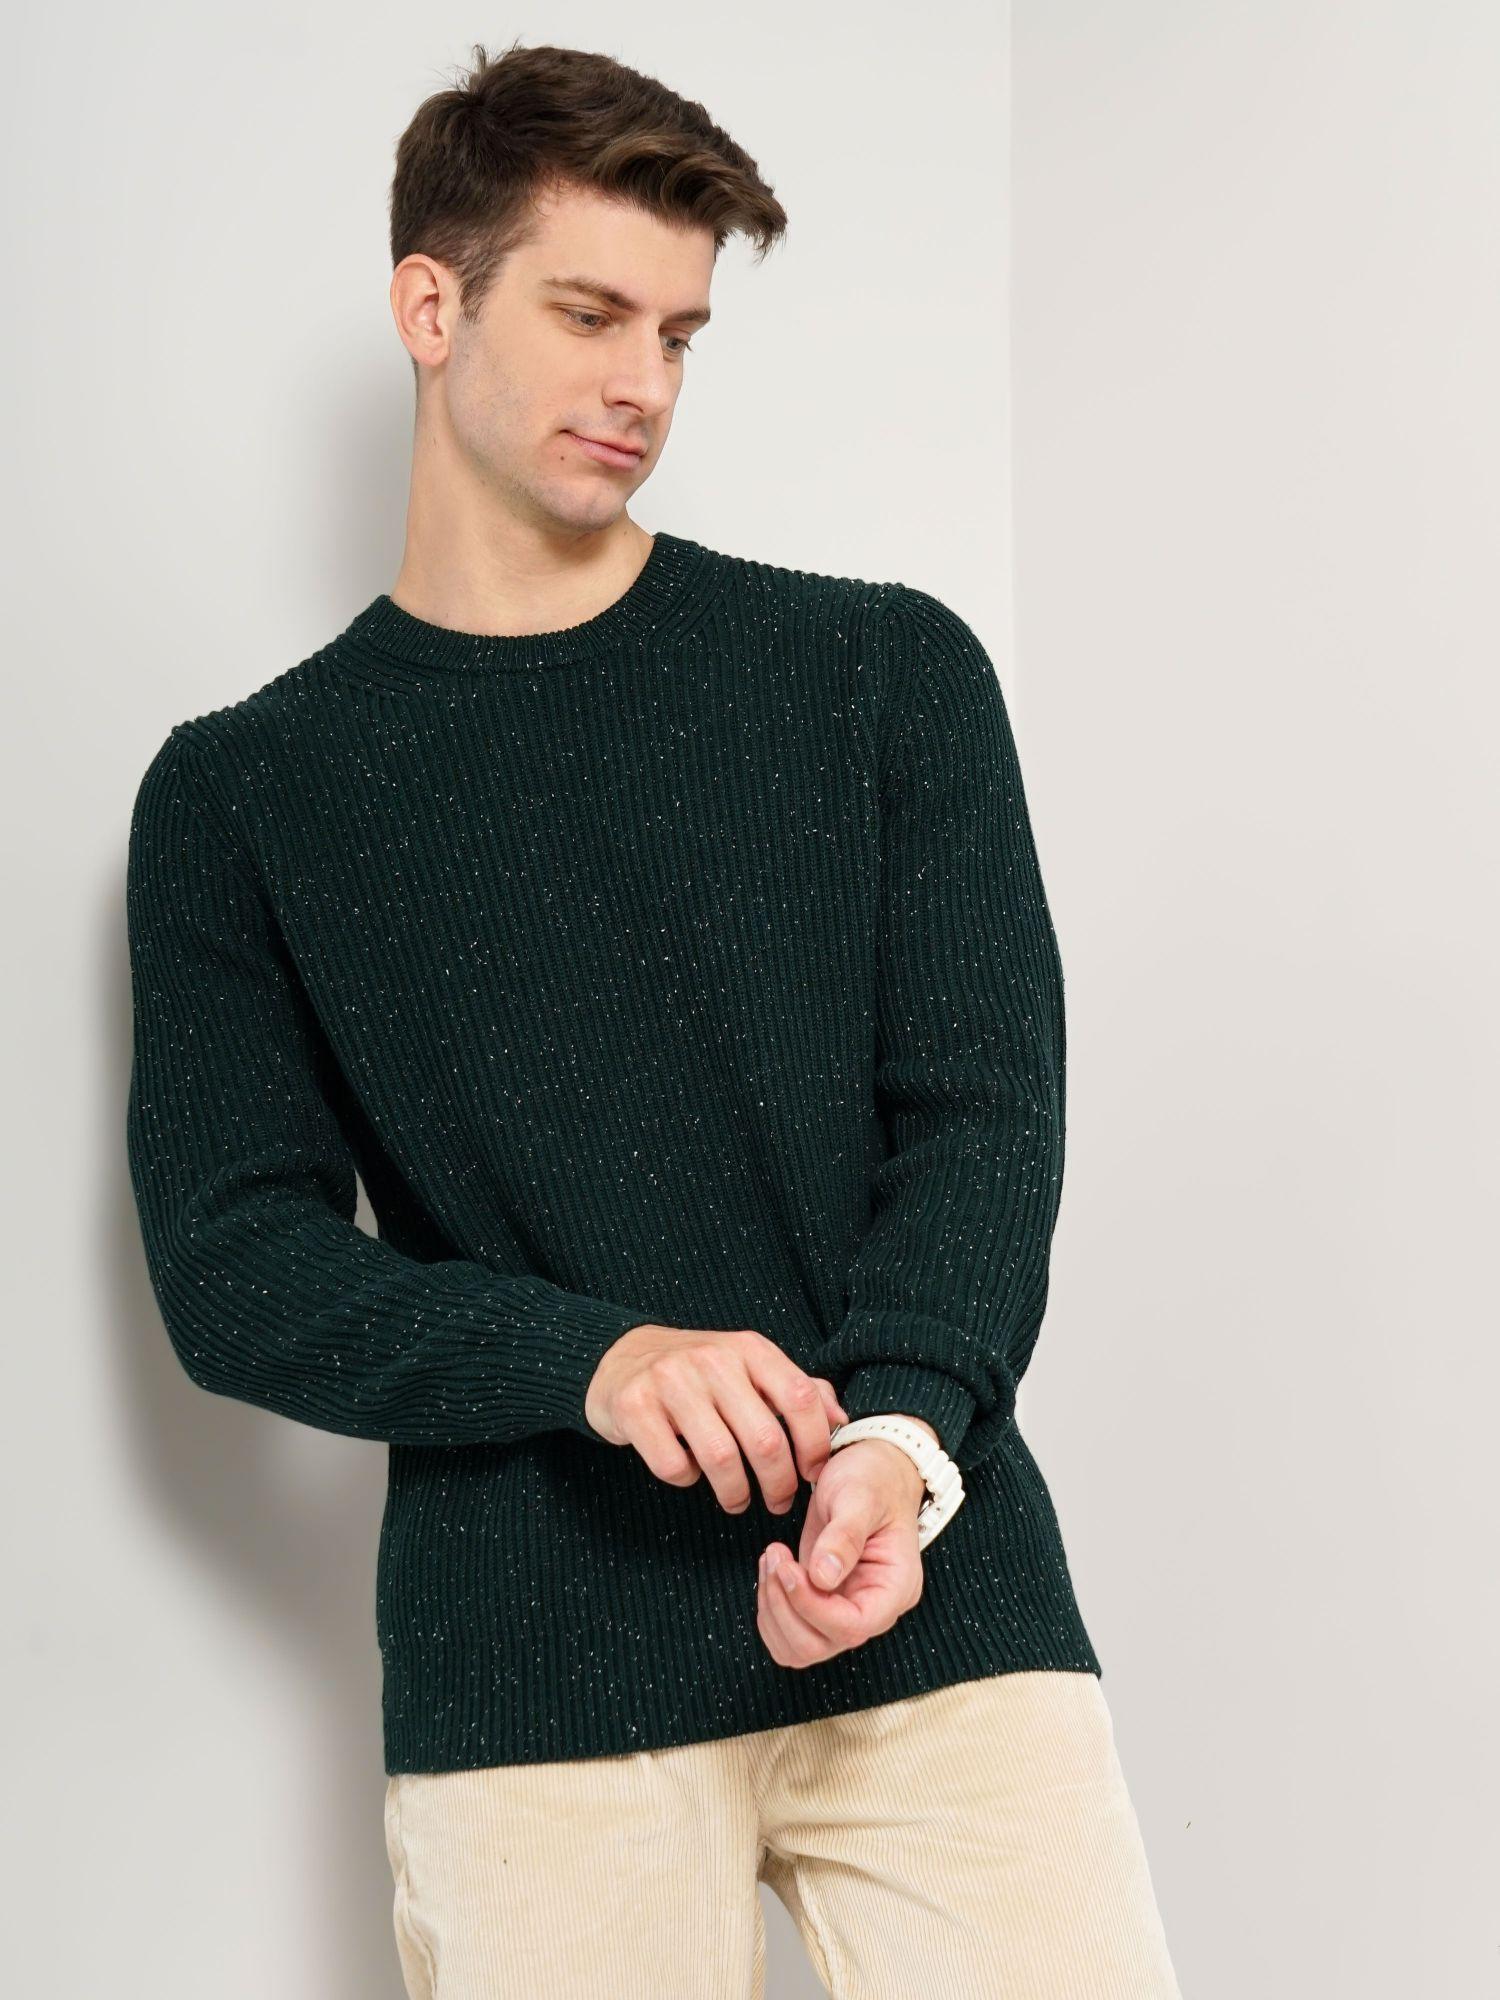 mens textured sweater